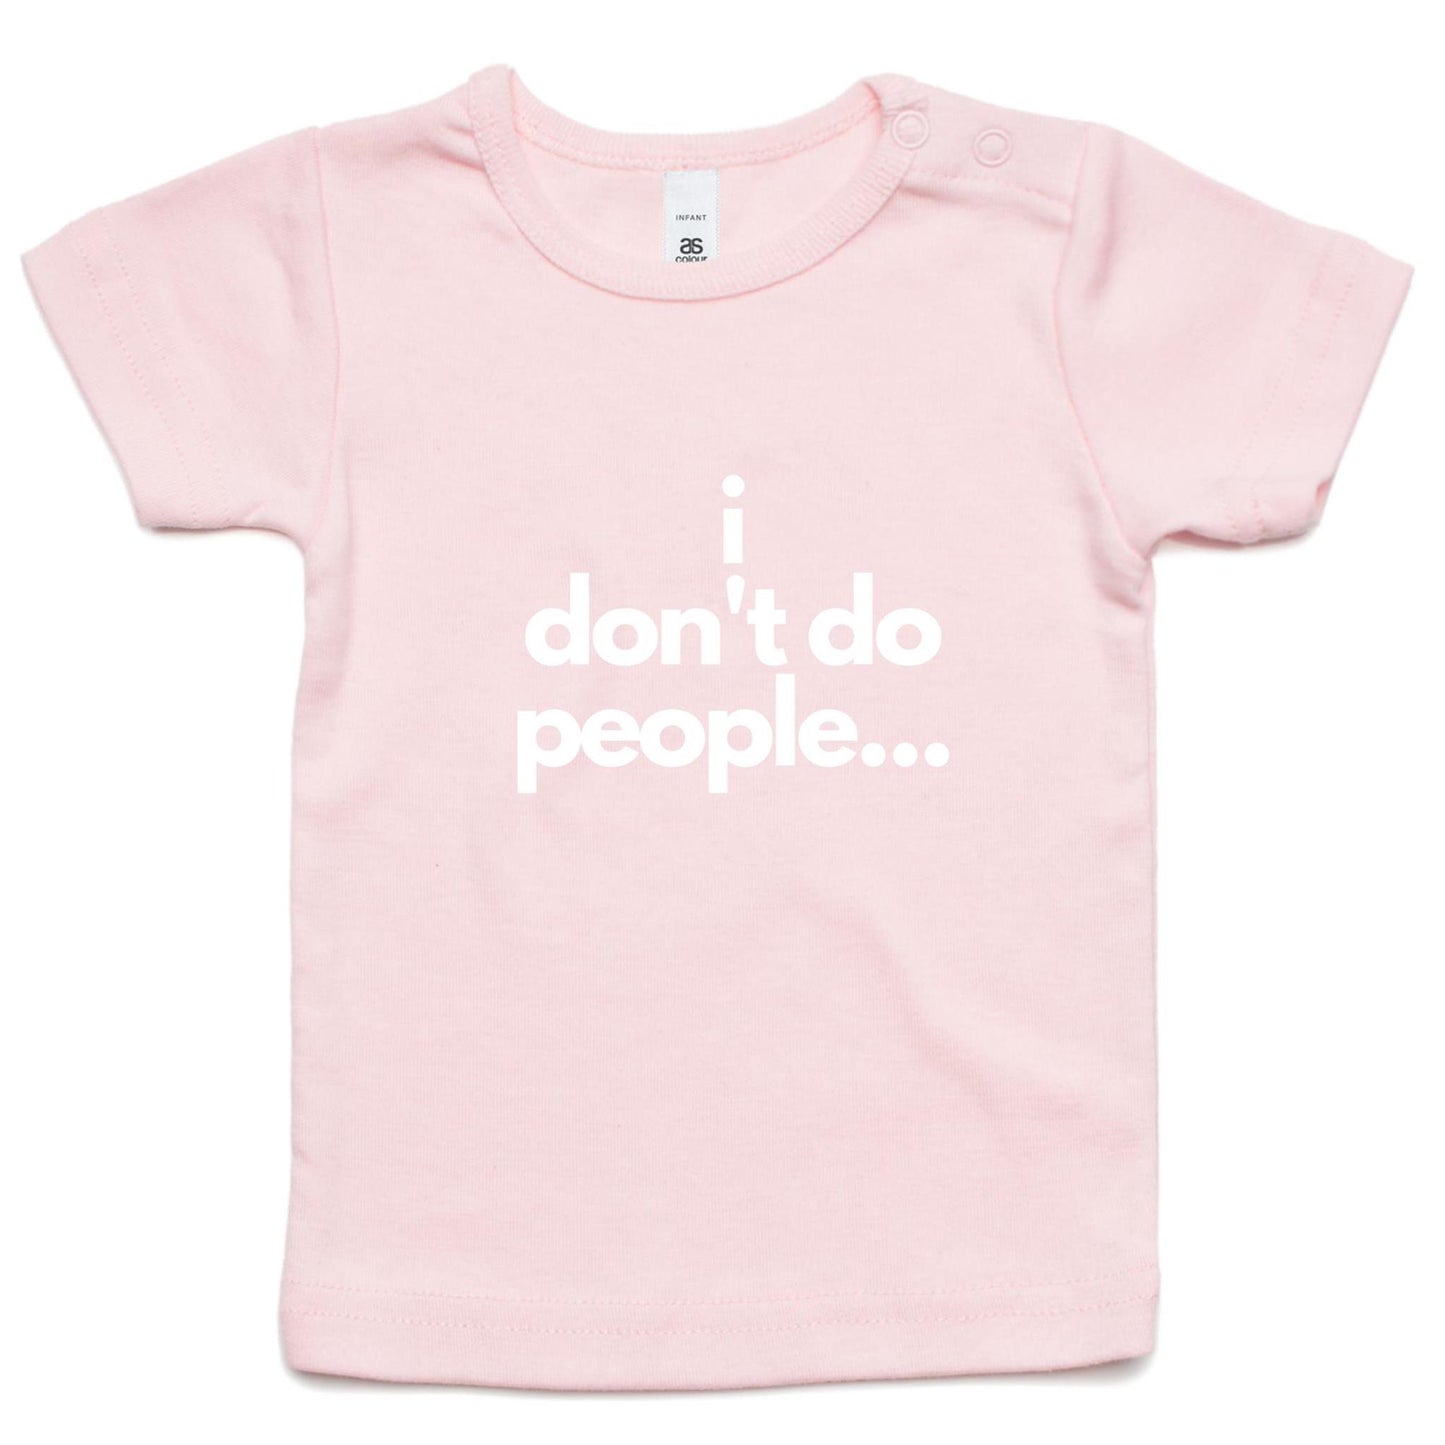 i don't do people - Infant Wee Tee